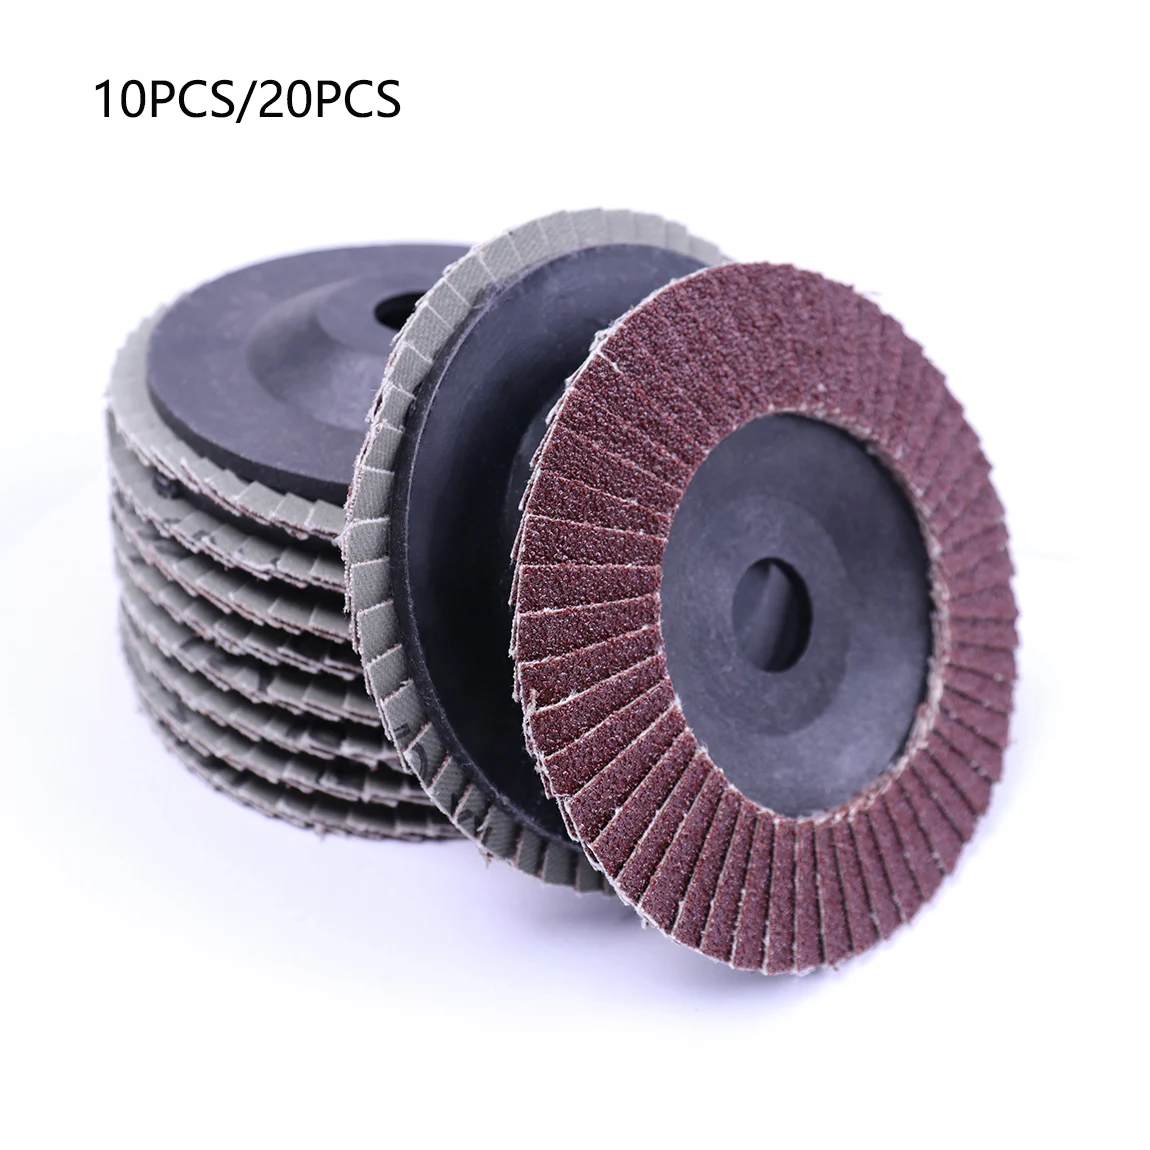 CHEERBRIGHT 10/20pcs Sanding Discs 80 Grit Grinding Wheel Blade for 100mm Angle Grinder Abrasive Tool Sanding Disc 16 22mm shaping disc woodworking angle grinding wheel sanding carving rotary tool abrasive disc angle grinder tungsten carbide